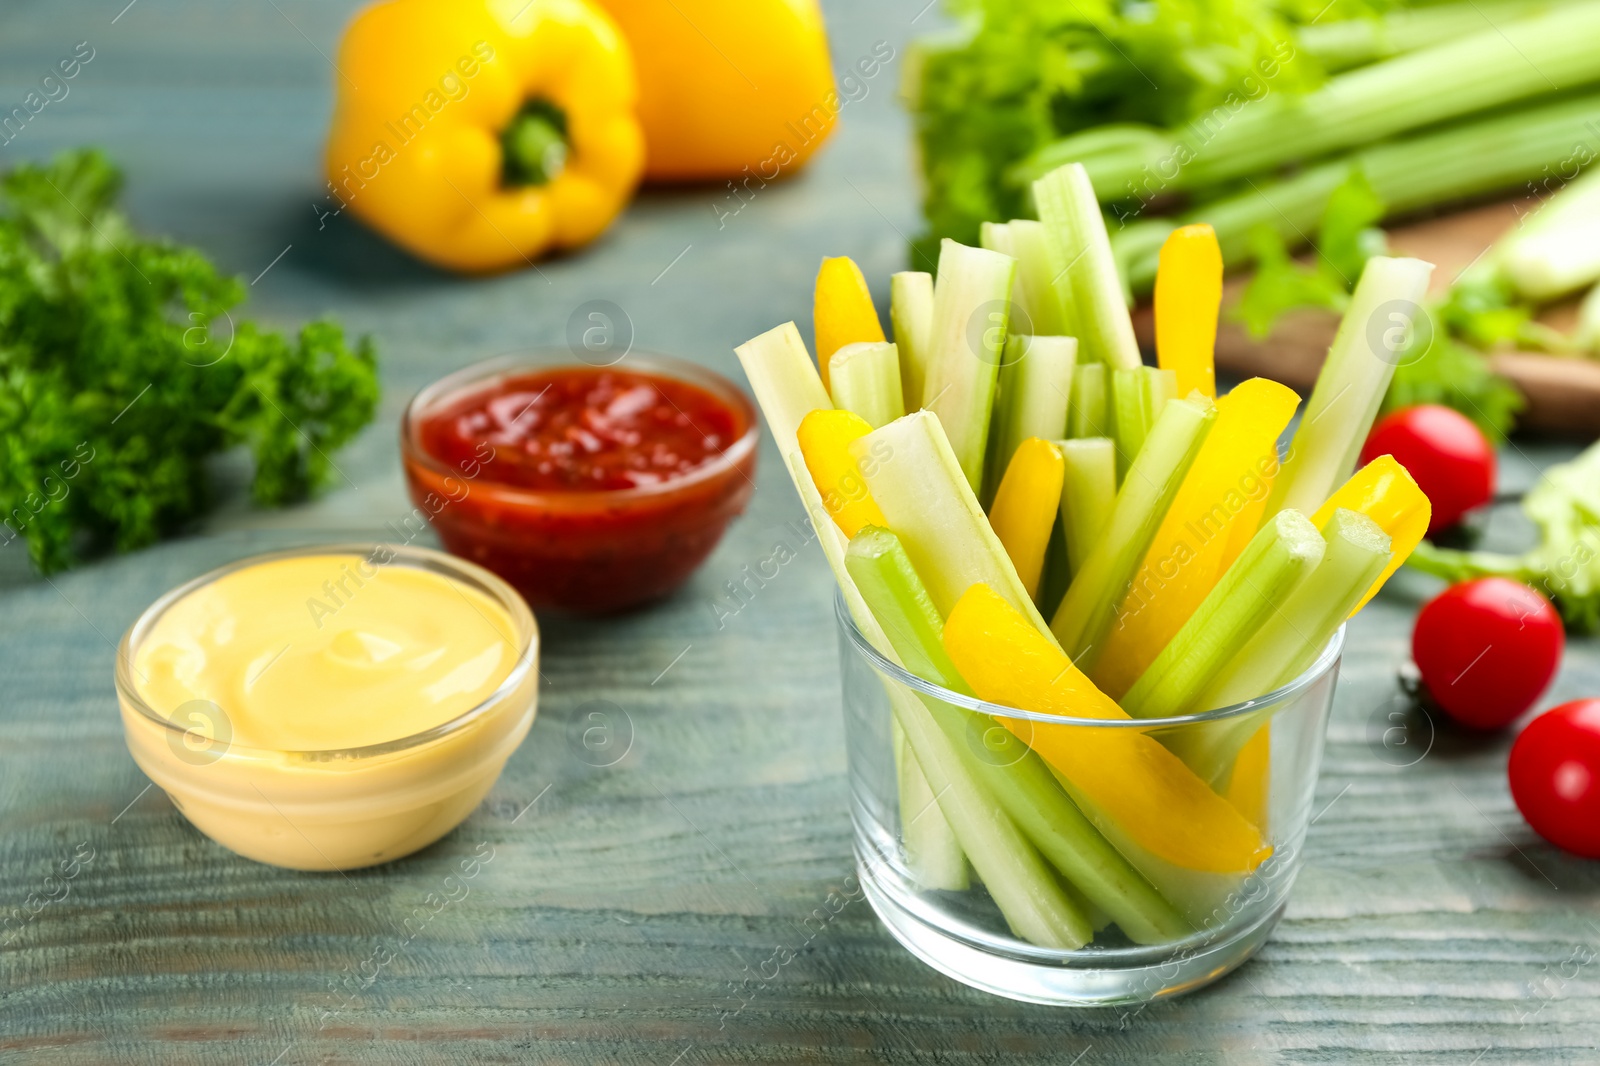 Photo of Celery sticks, pepper slices in glass bowl and different sauces on light blue wooden table